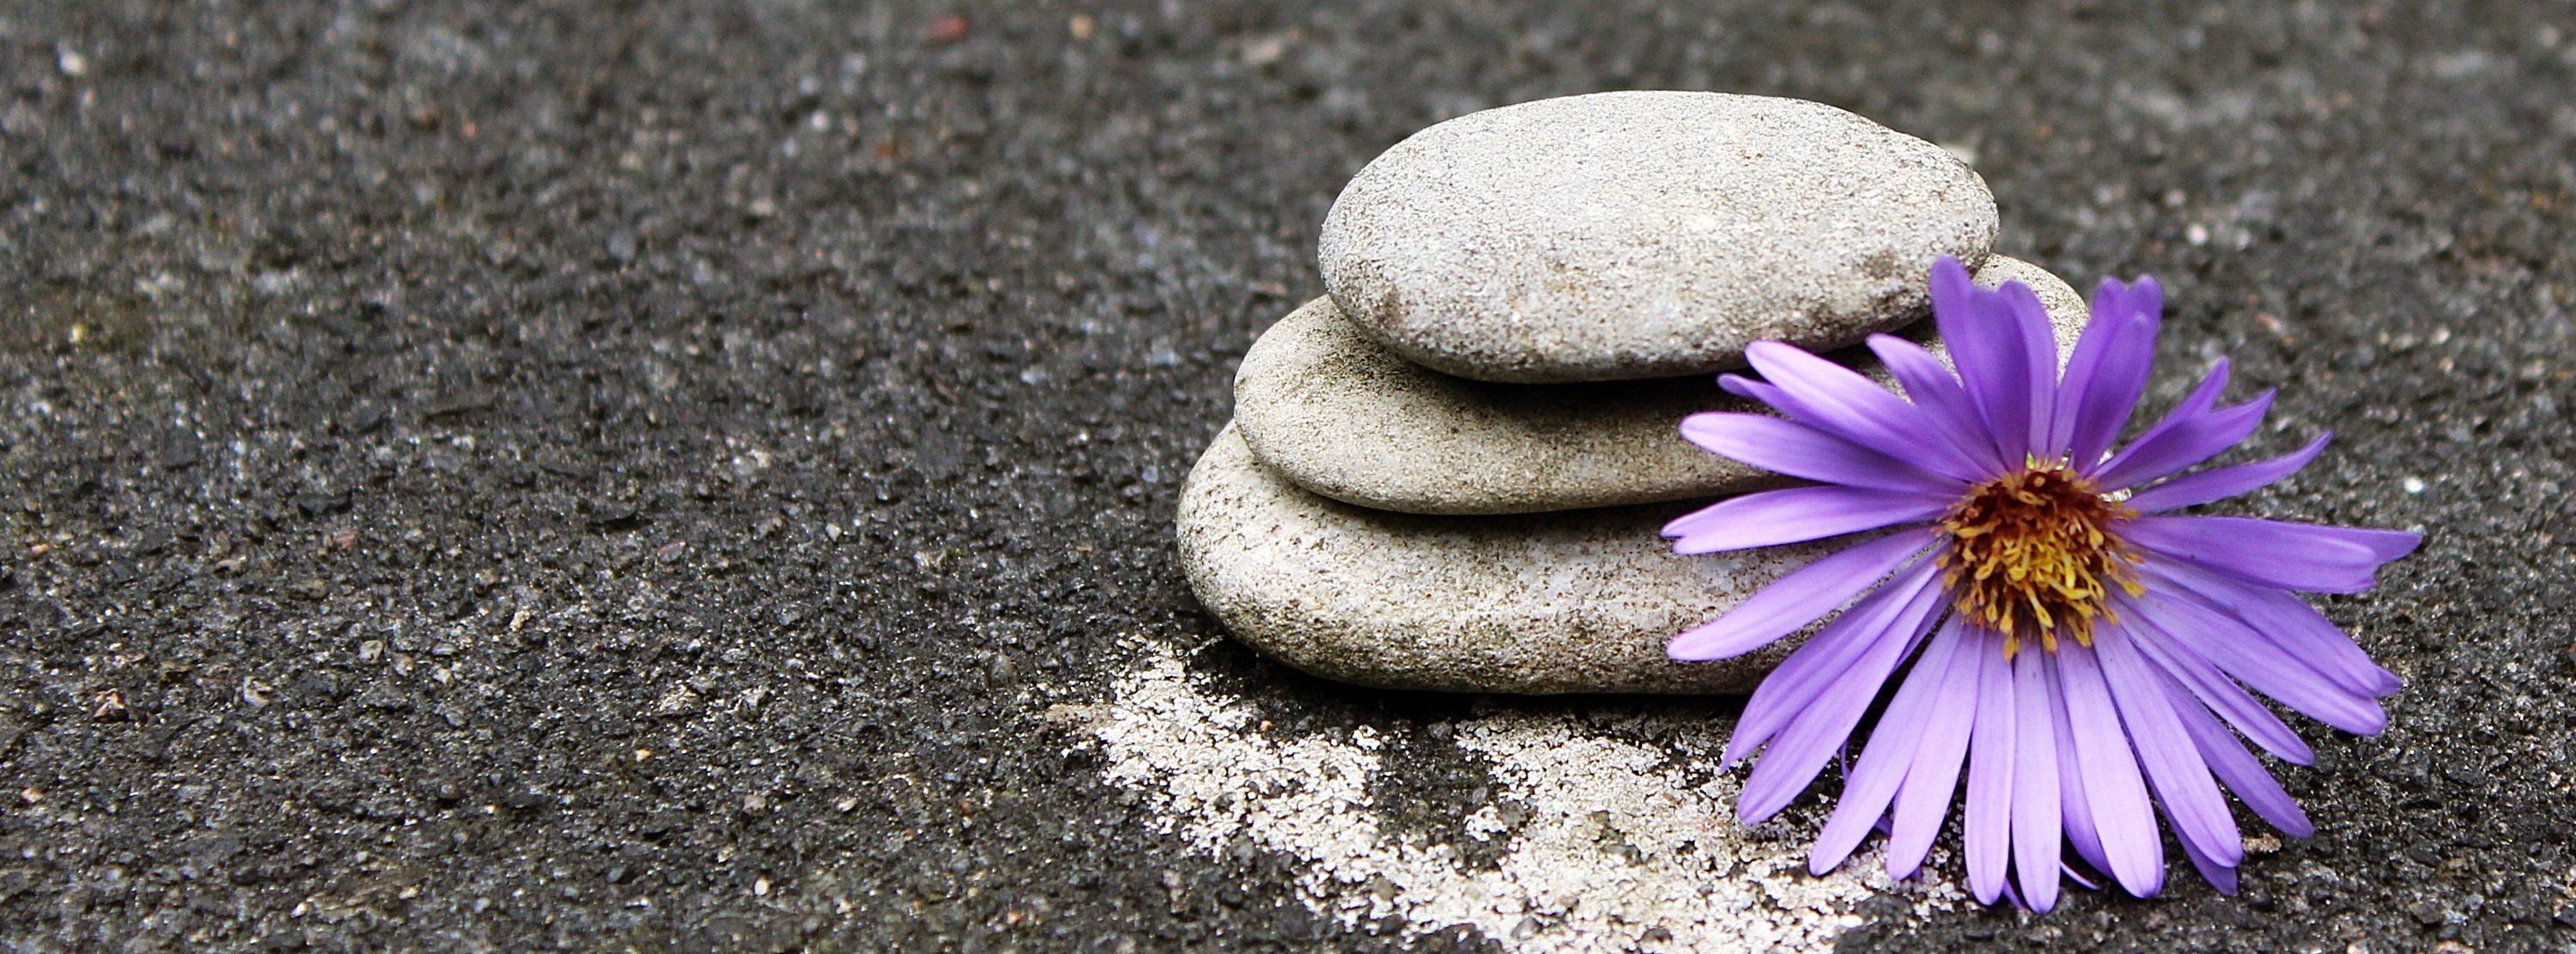 Rocks stacked on sand with a purple flower.